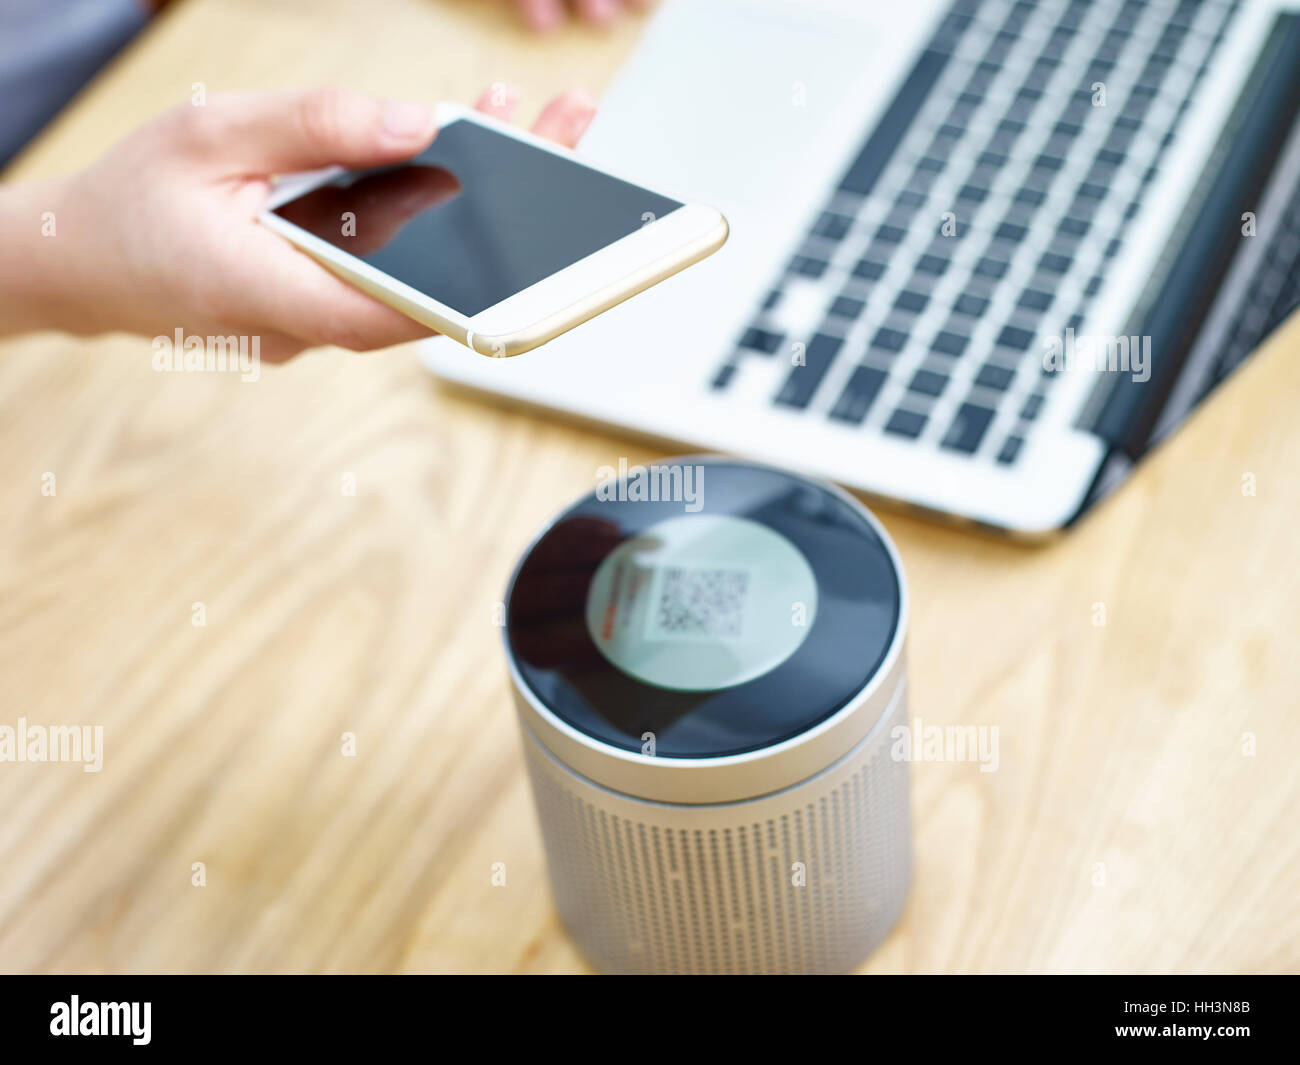 hand of a person holding cellphone playing music through a portable bluetooth speaker. Stock Photo